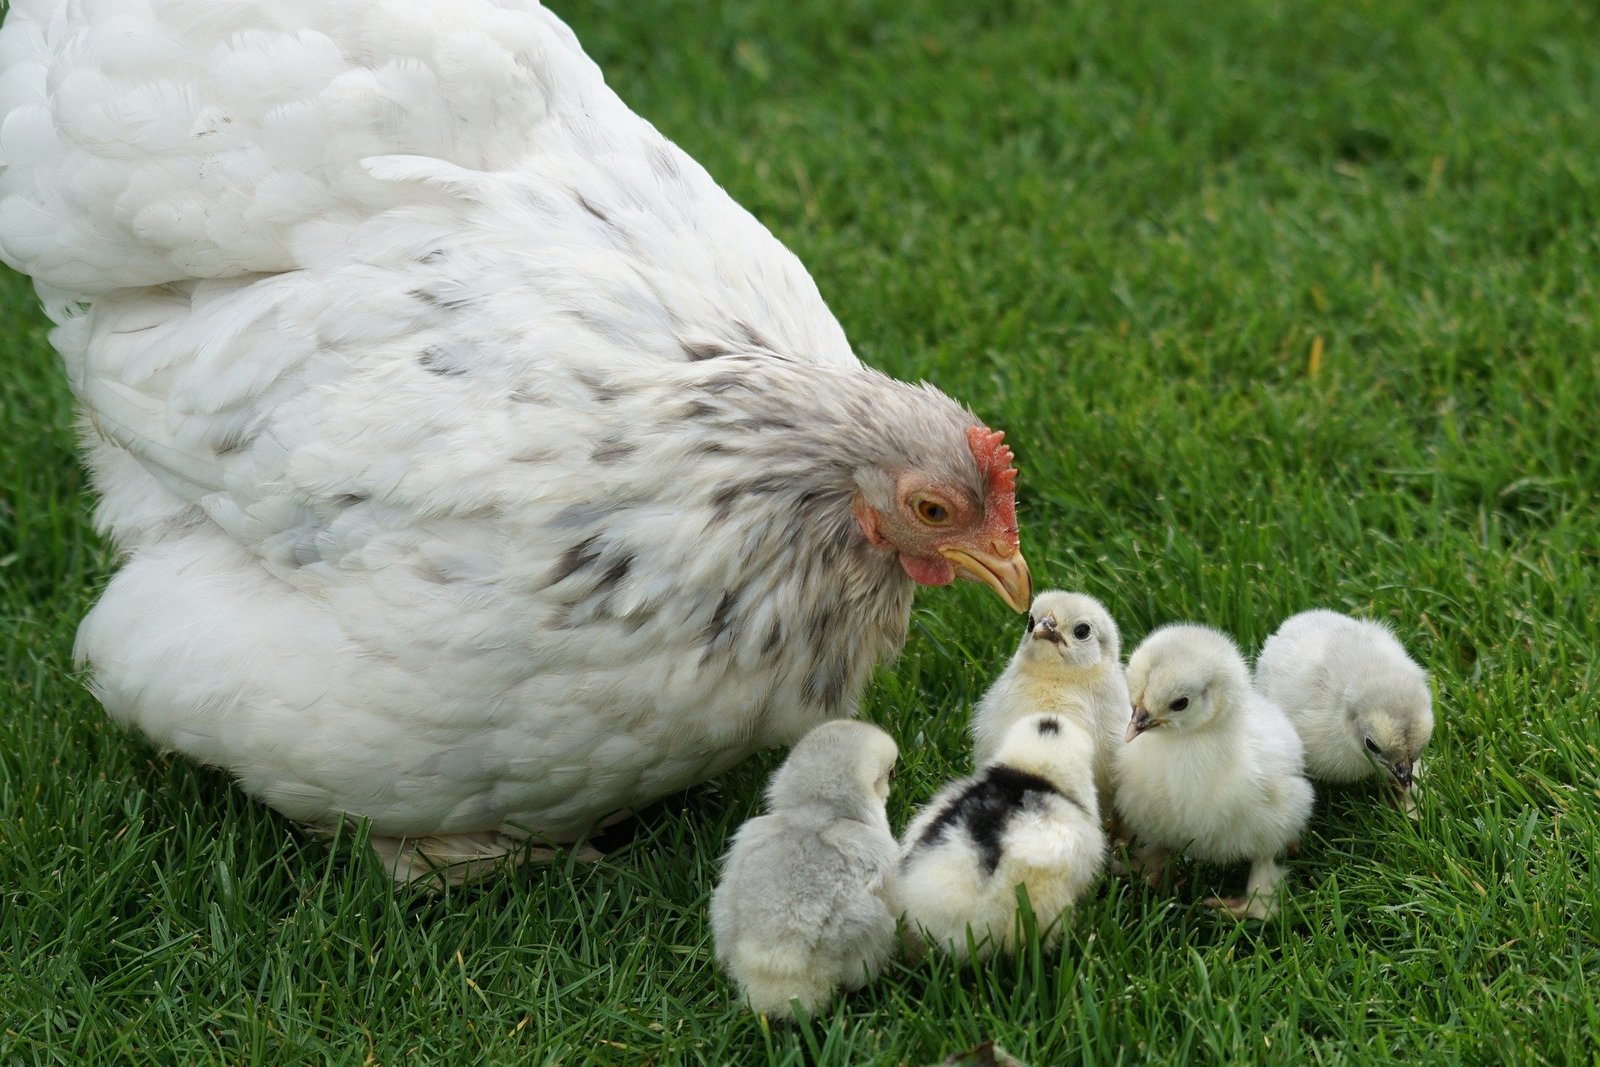 A New Poultry Farming Perspective